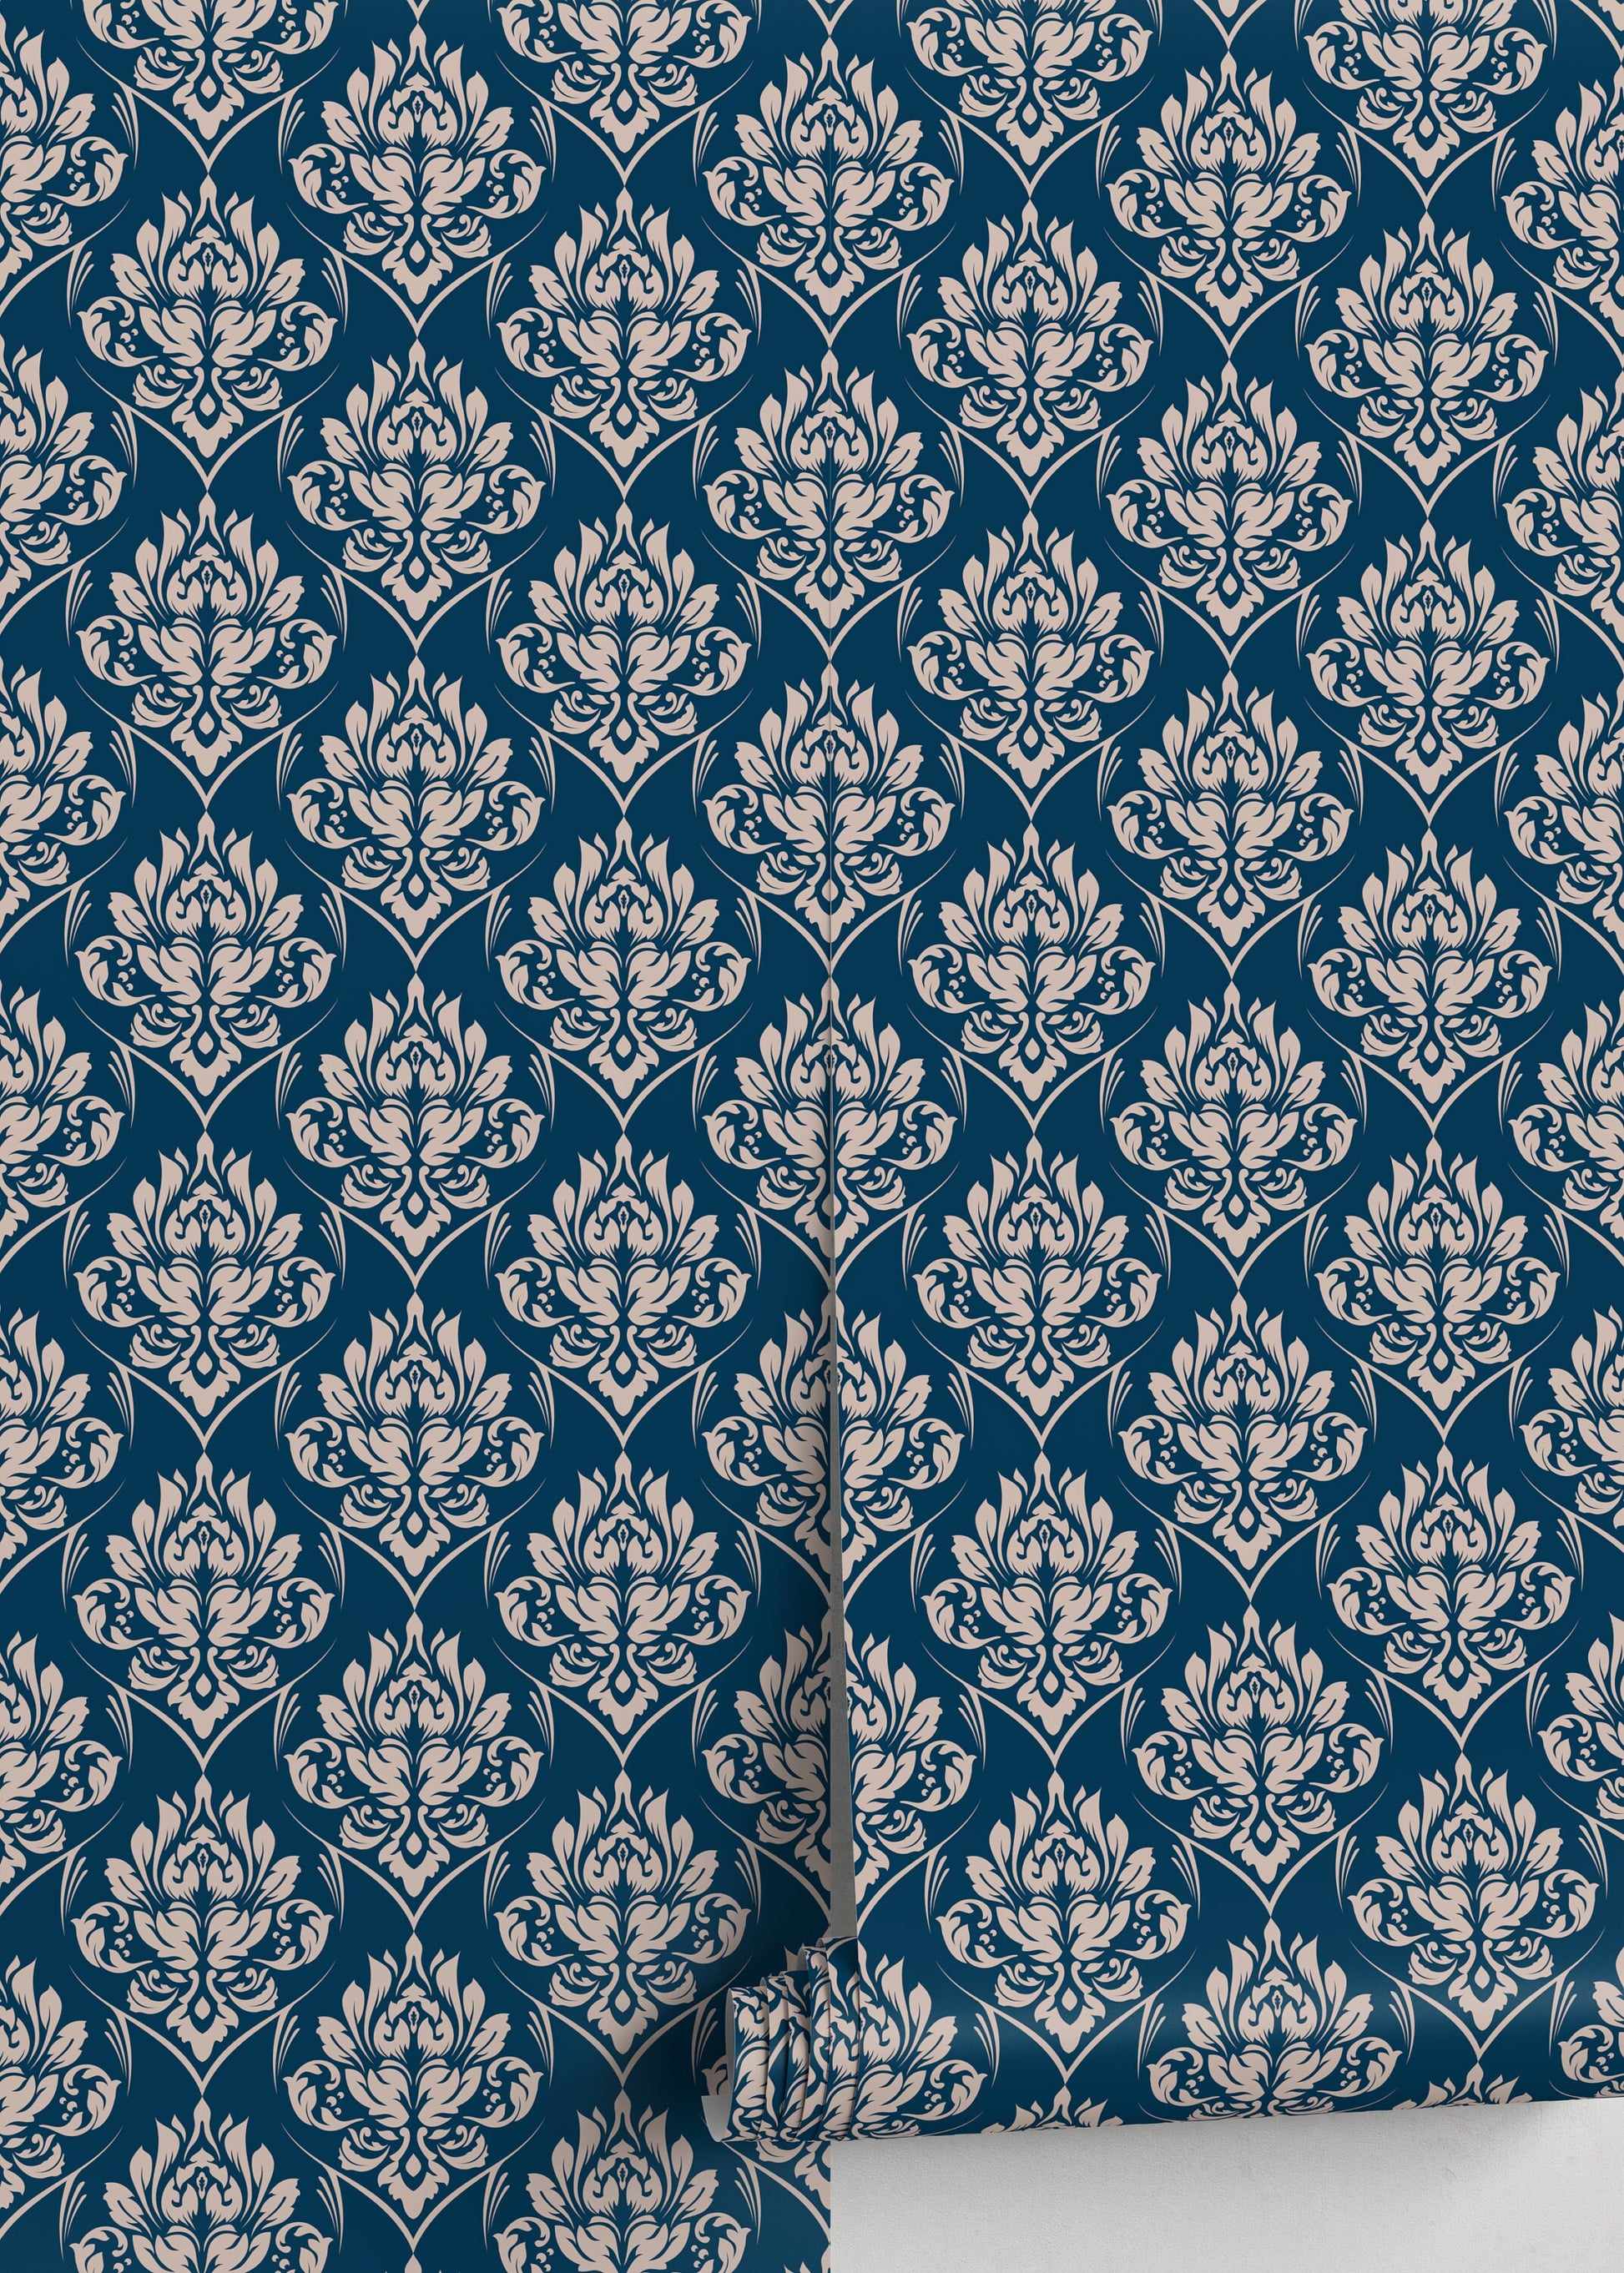 Blue and Beige Damask Wallpaper / Peel and Stick Wallpaper Removable Wallpaper Home Decor Wall Art Wall Decor Room Decor - D227